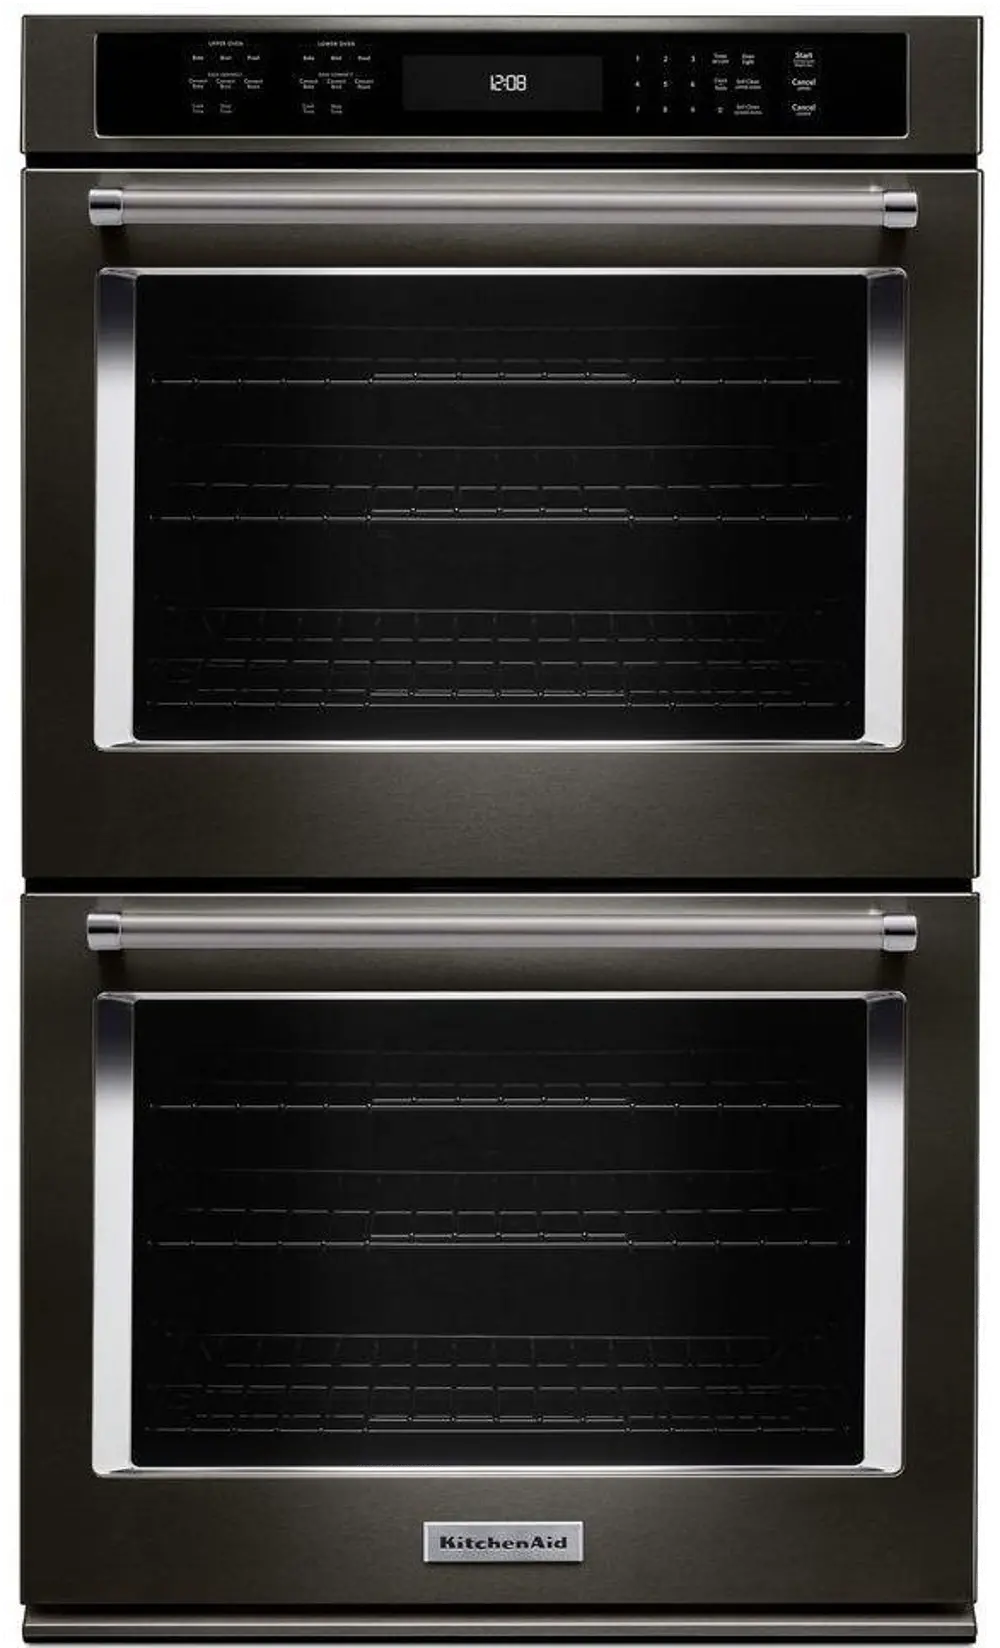 KODE500EBS KitchenAid 10 cu ft Double Wall Oven - Black Stainless Steel 30 Inch-1